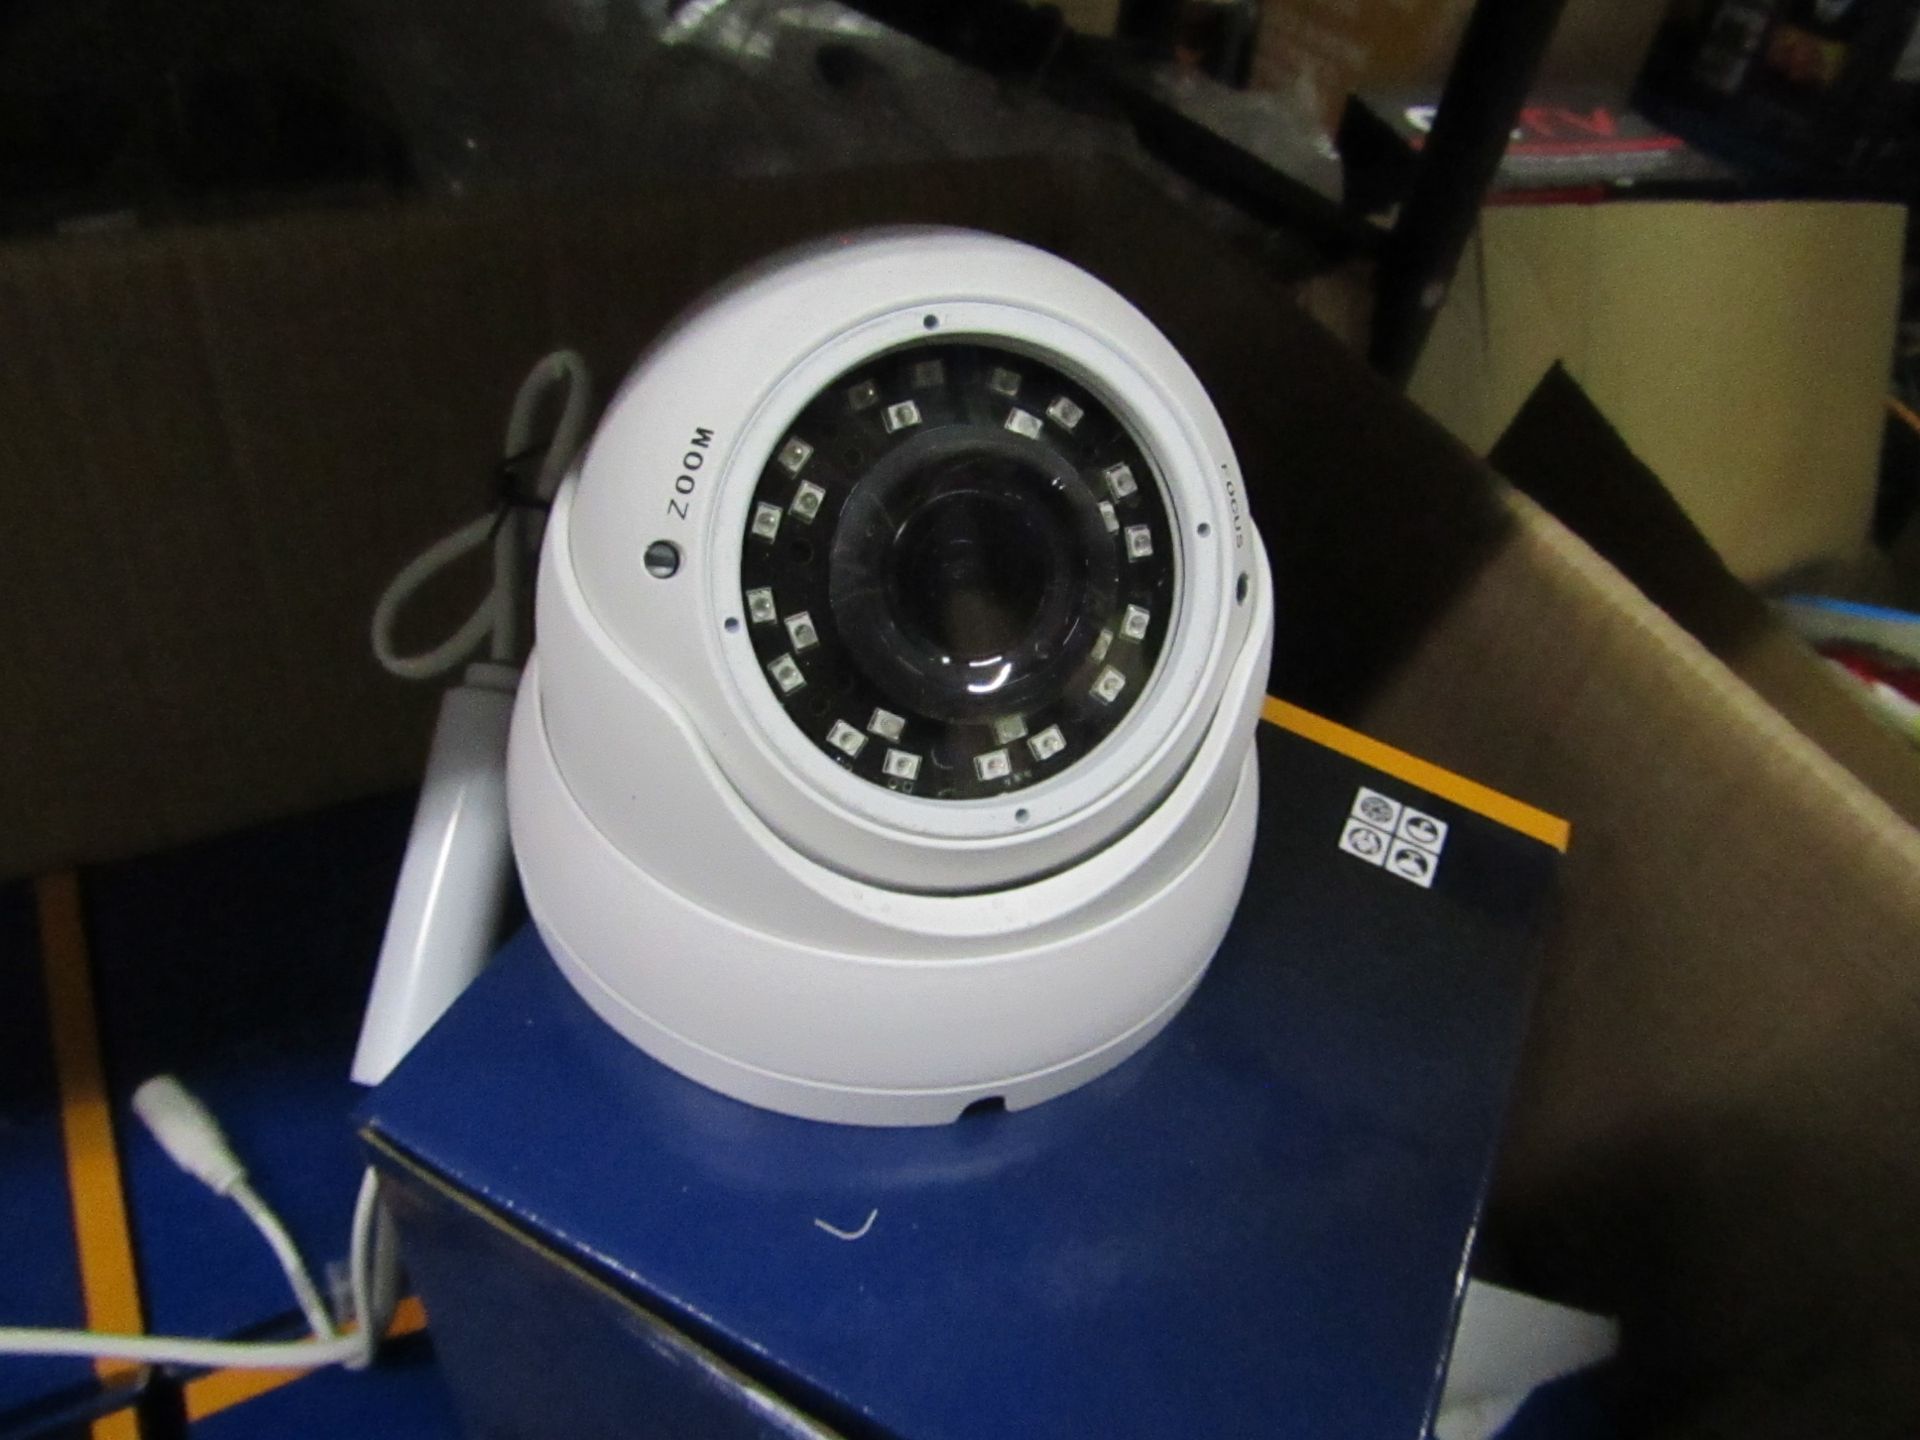 4x CCTV colour network dome cameras, unchecked and boxed.